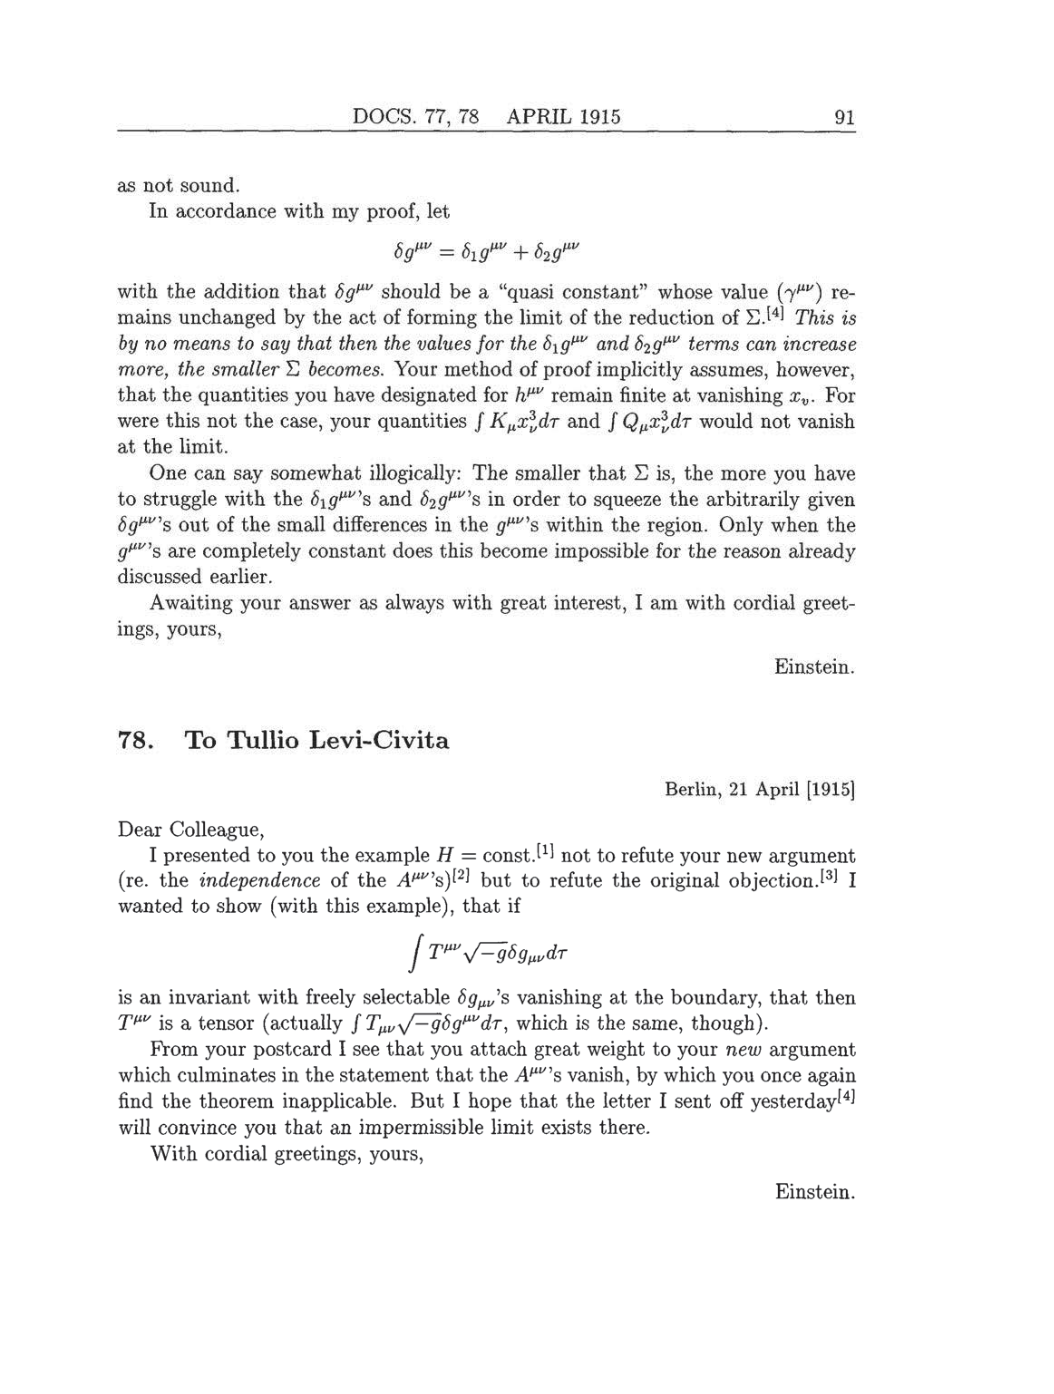 Volume 8: The Berlin Years: Correspondence, 1914-1918 (English translation supplement) page 91